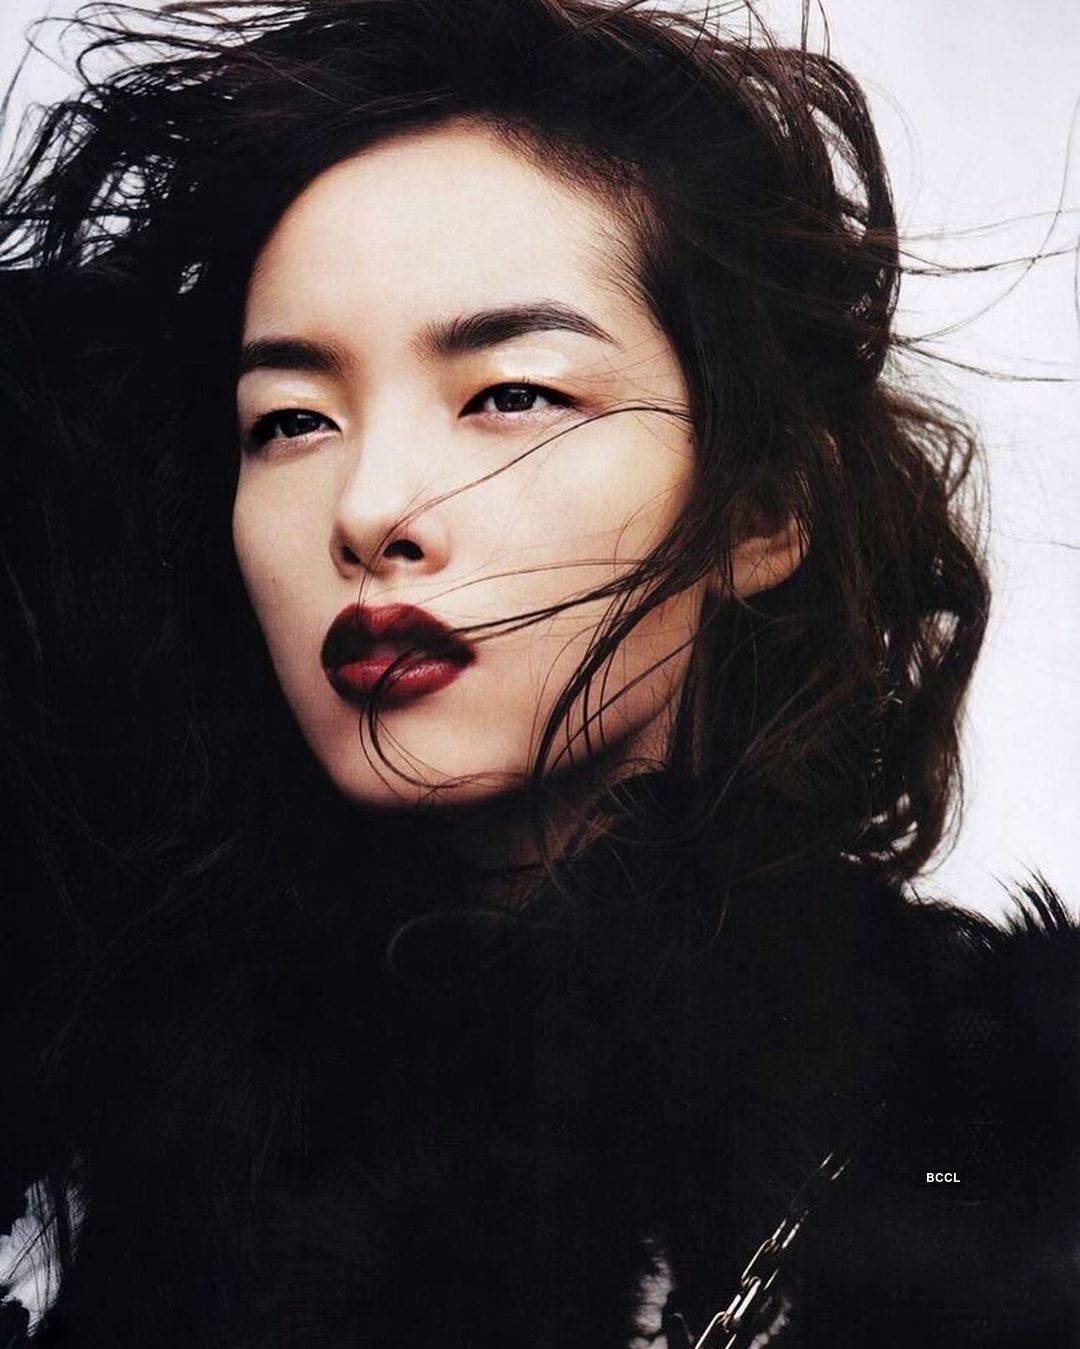 Fei Fei Sun puts China on the world map for fashion